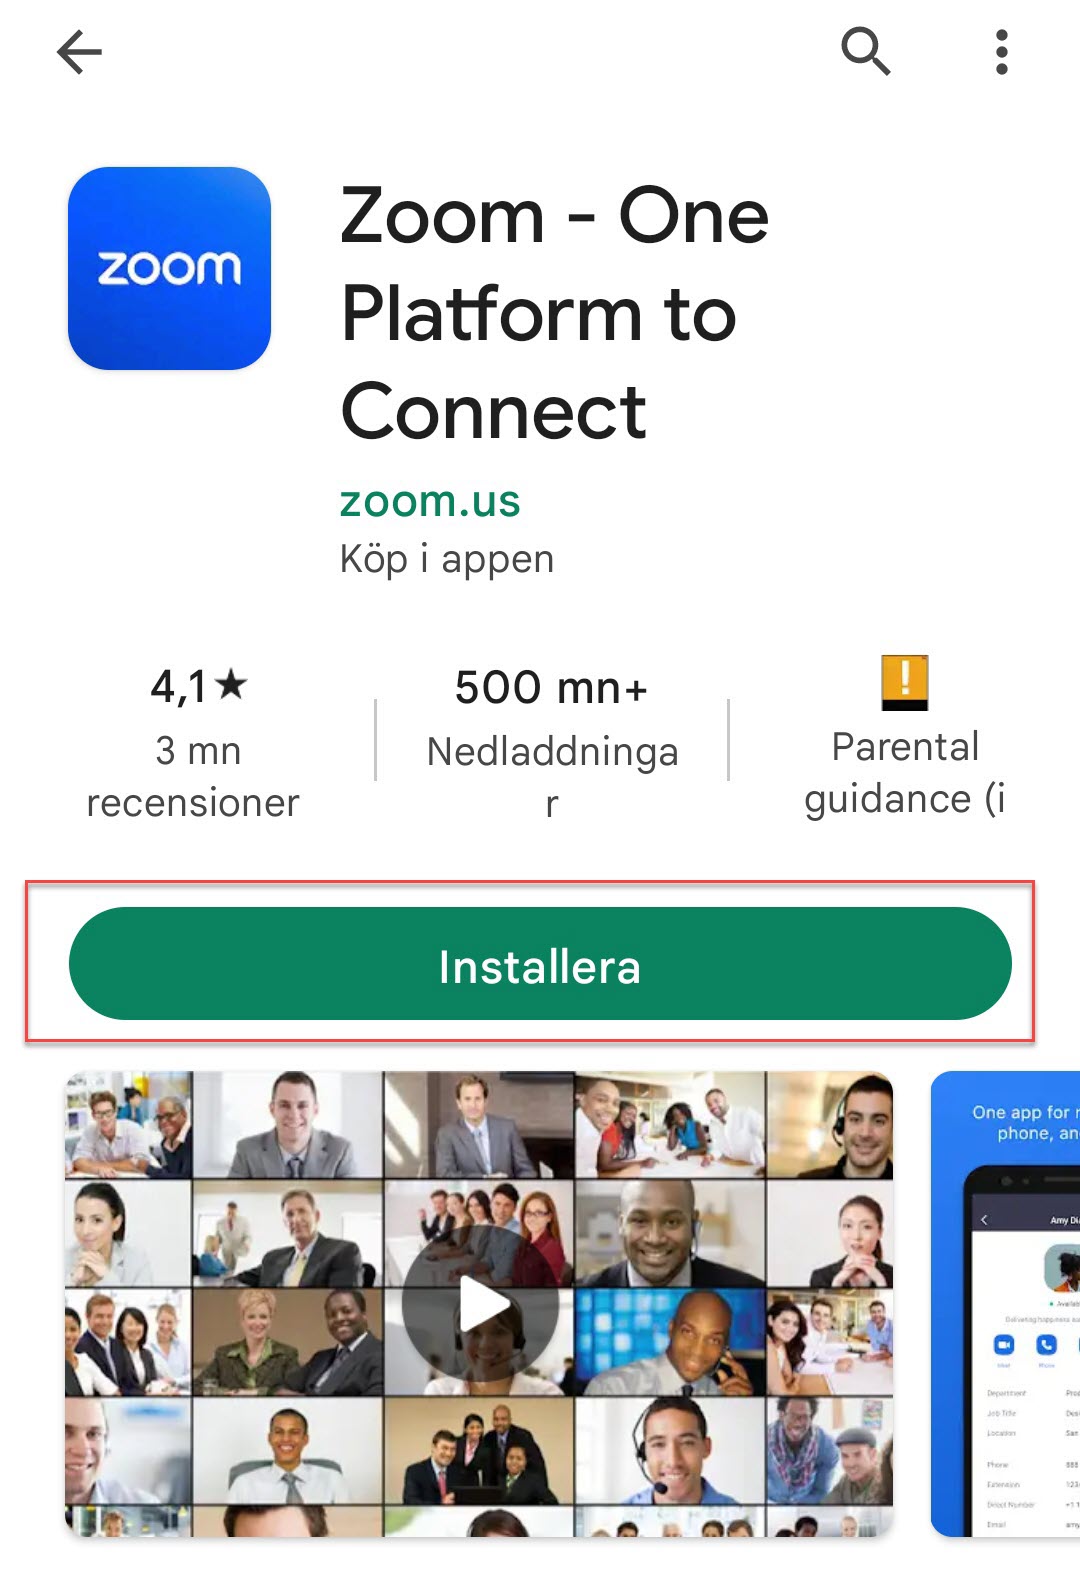 Button to install the Zoom app.